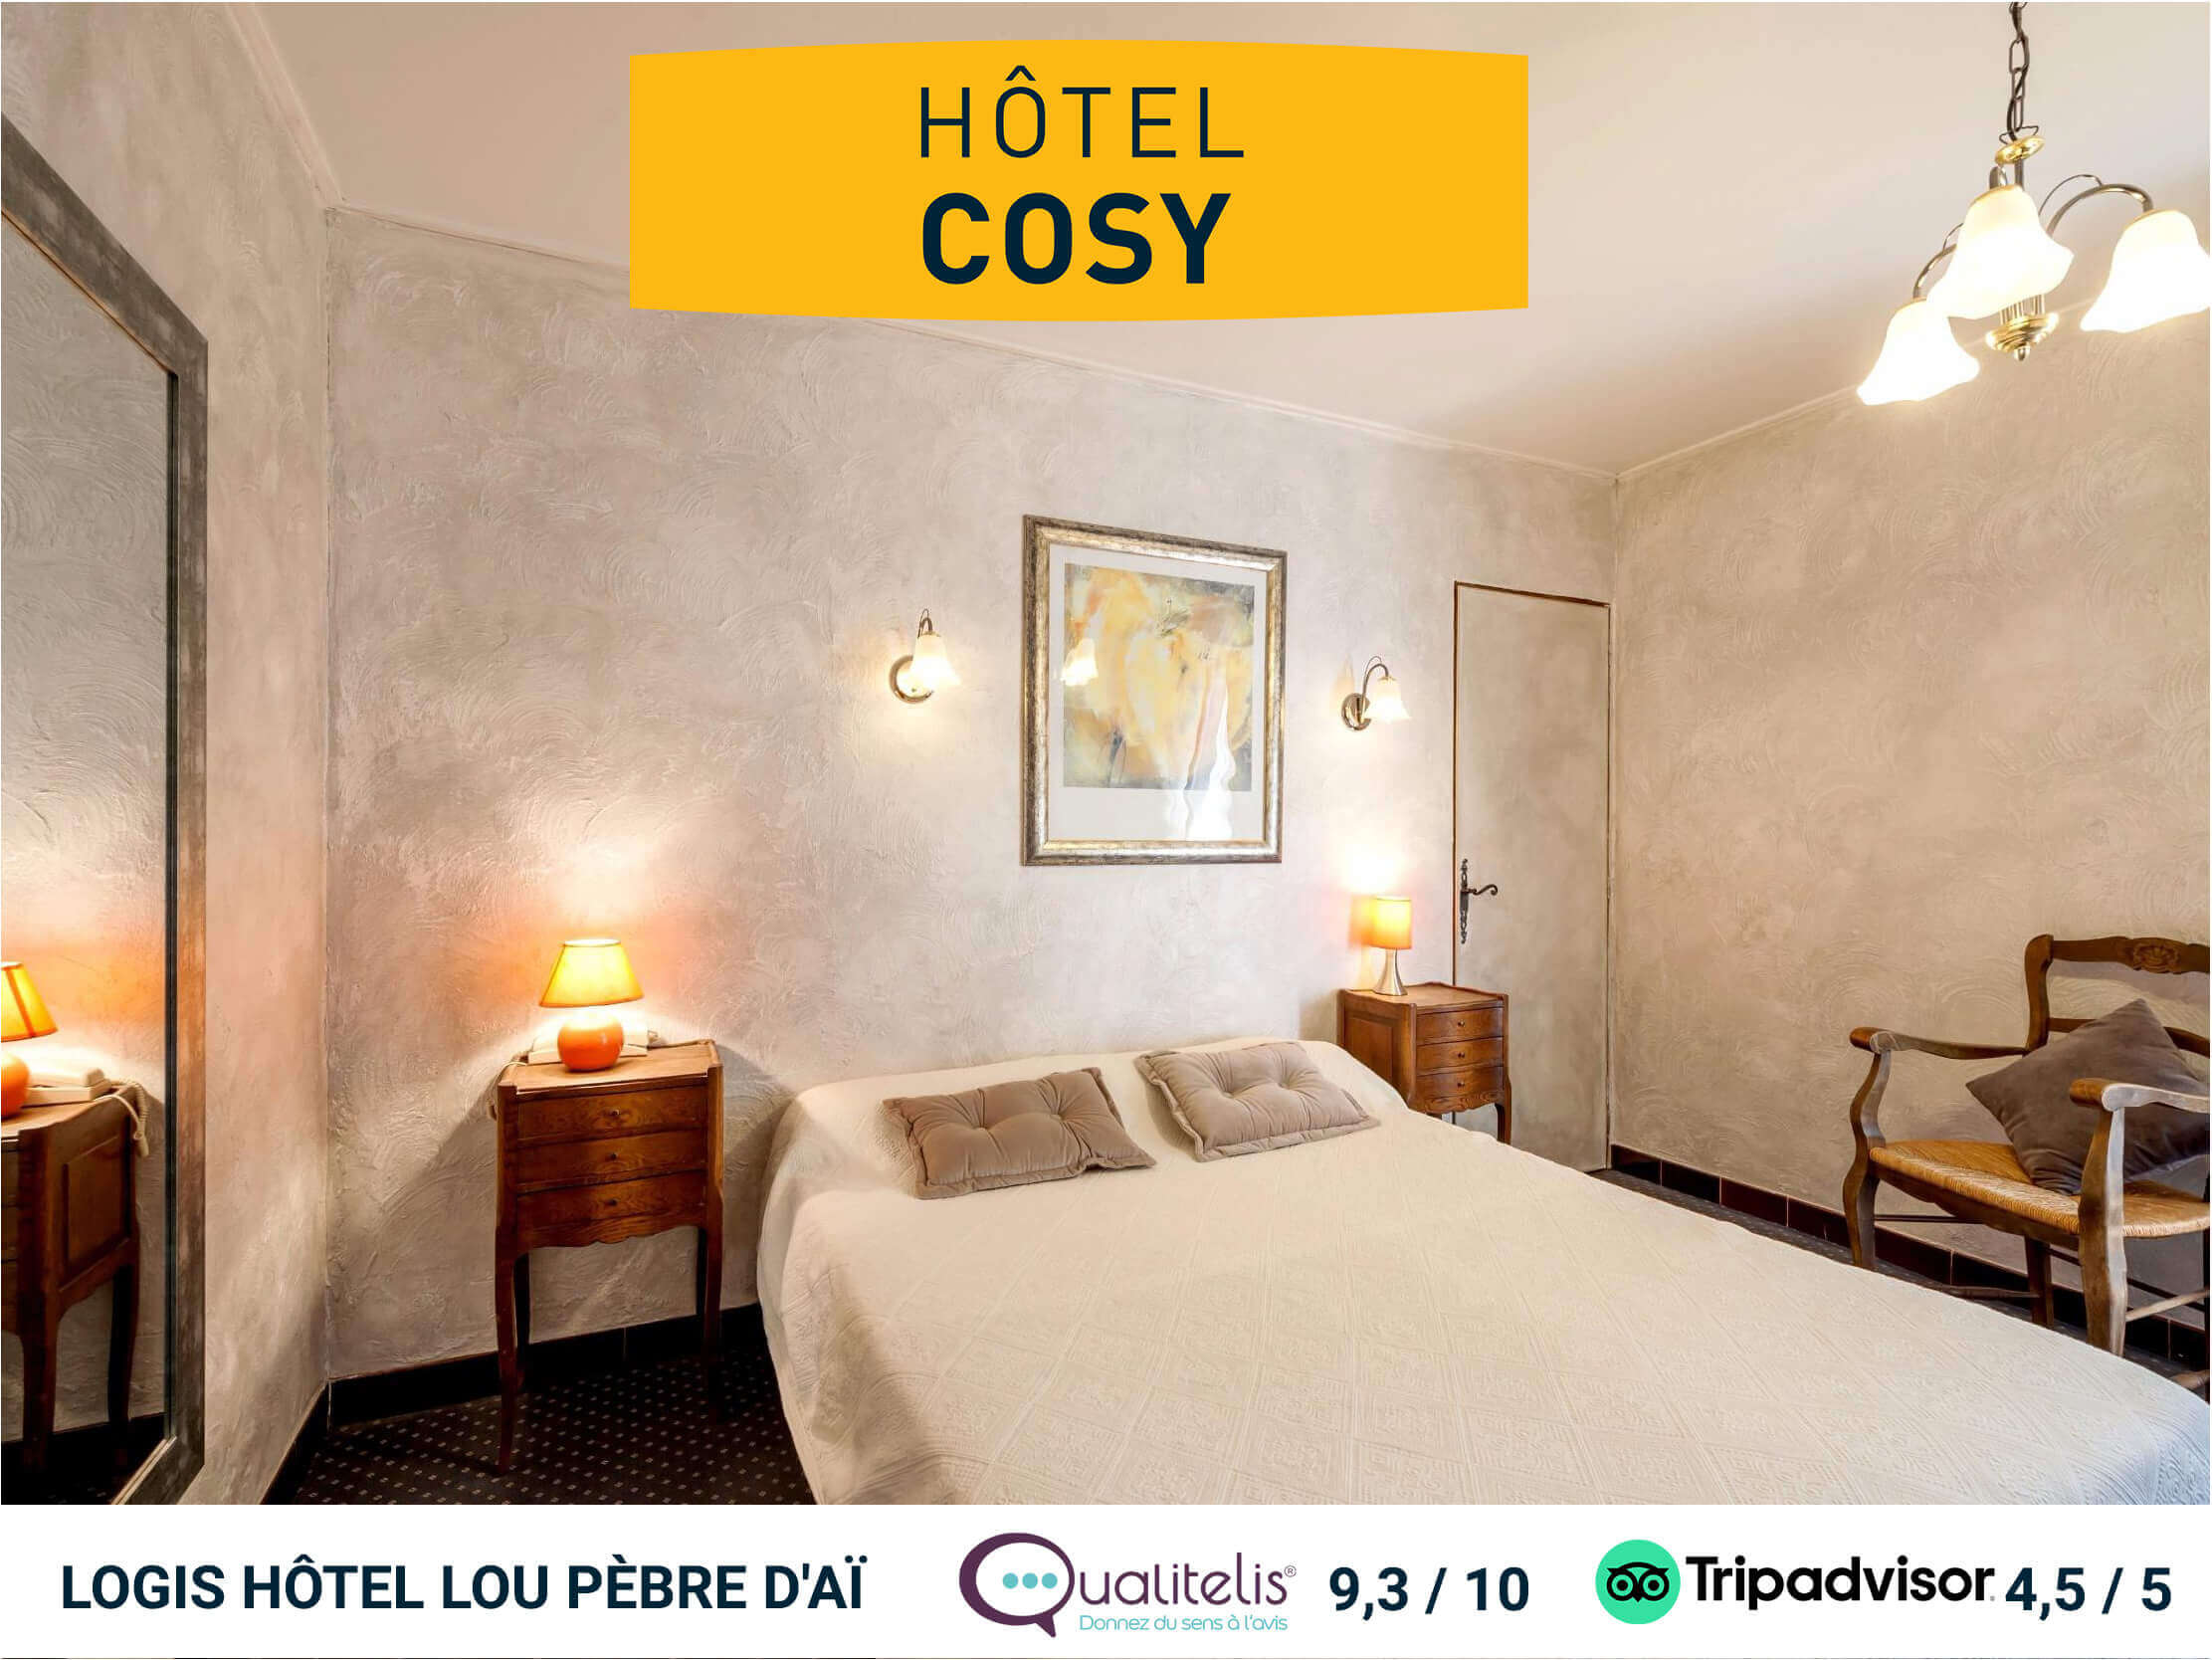 Hôtel Cosy: AN INVITING, COCOONING ATMOSPHERE.